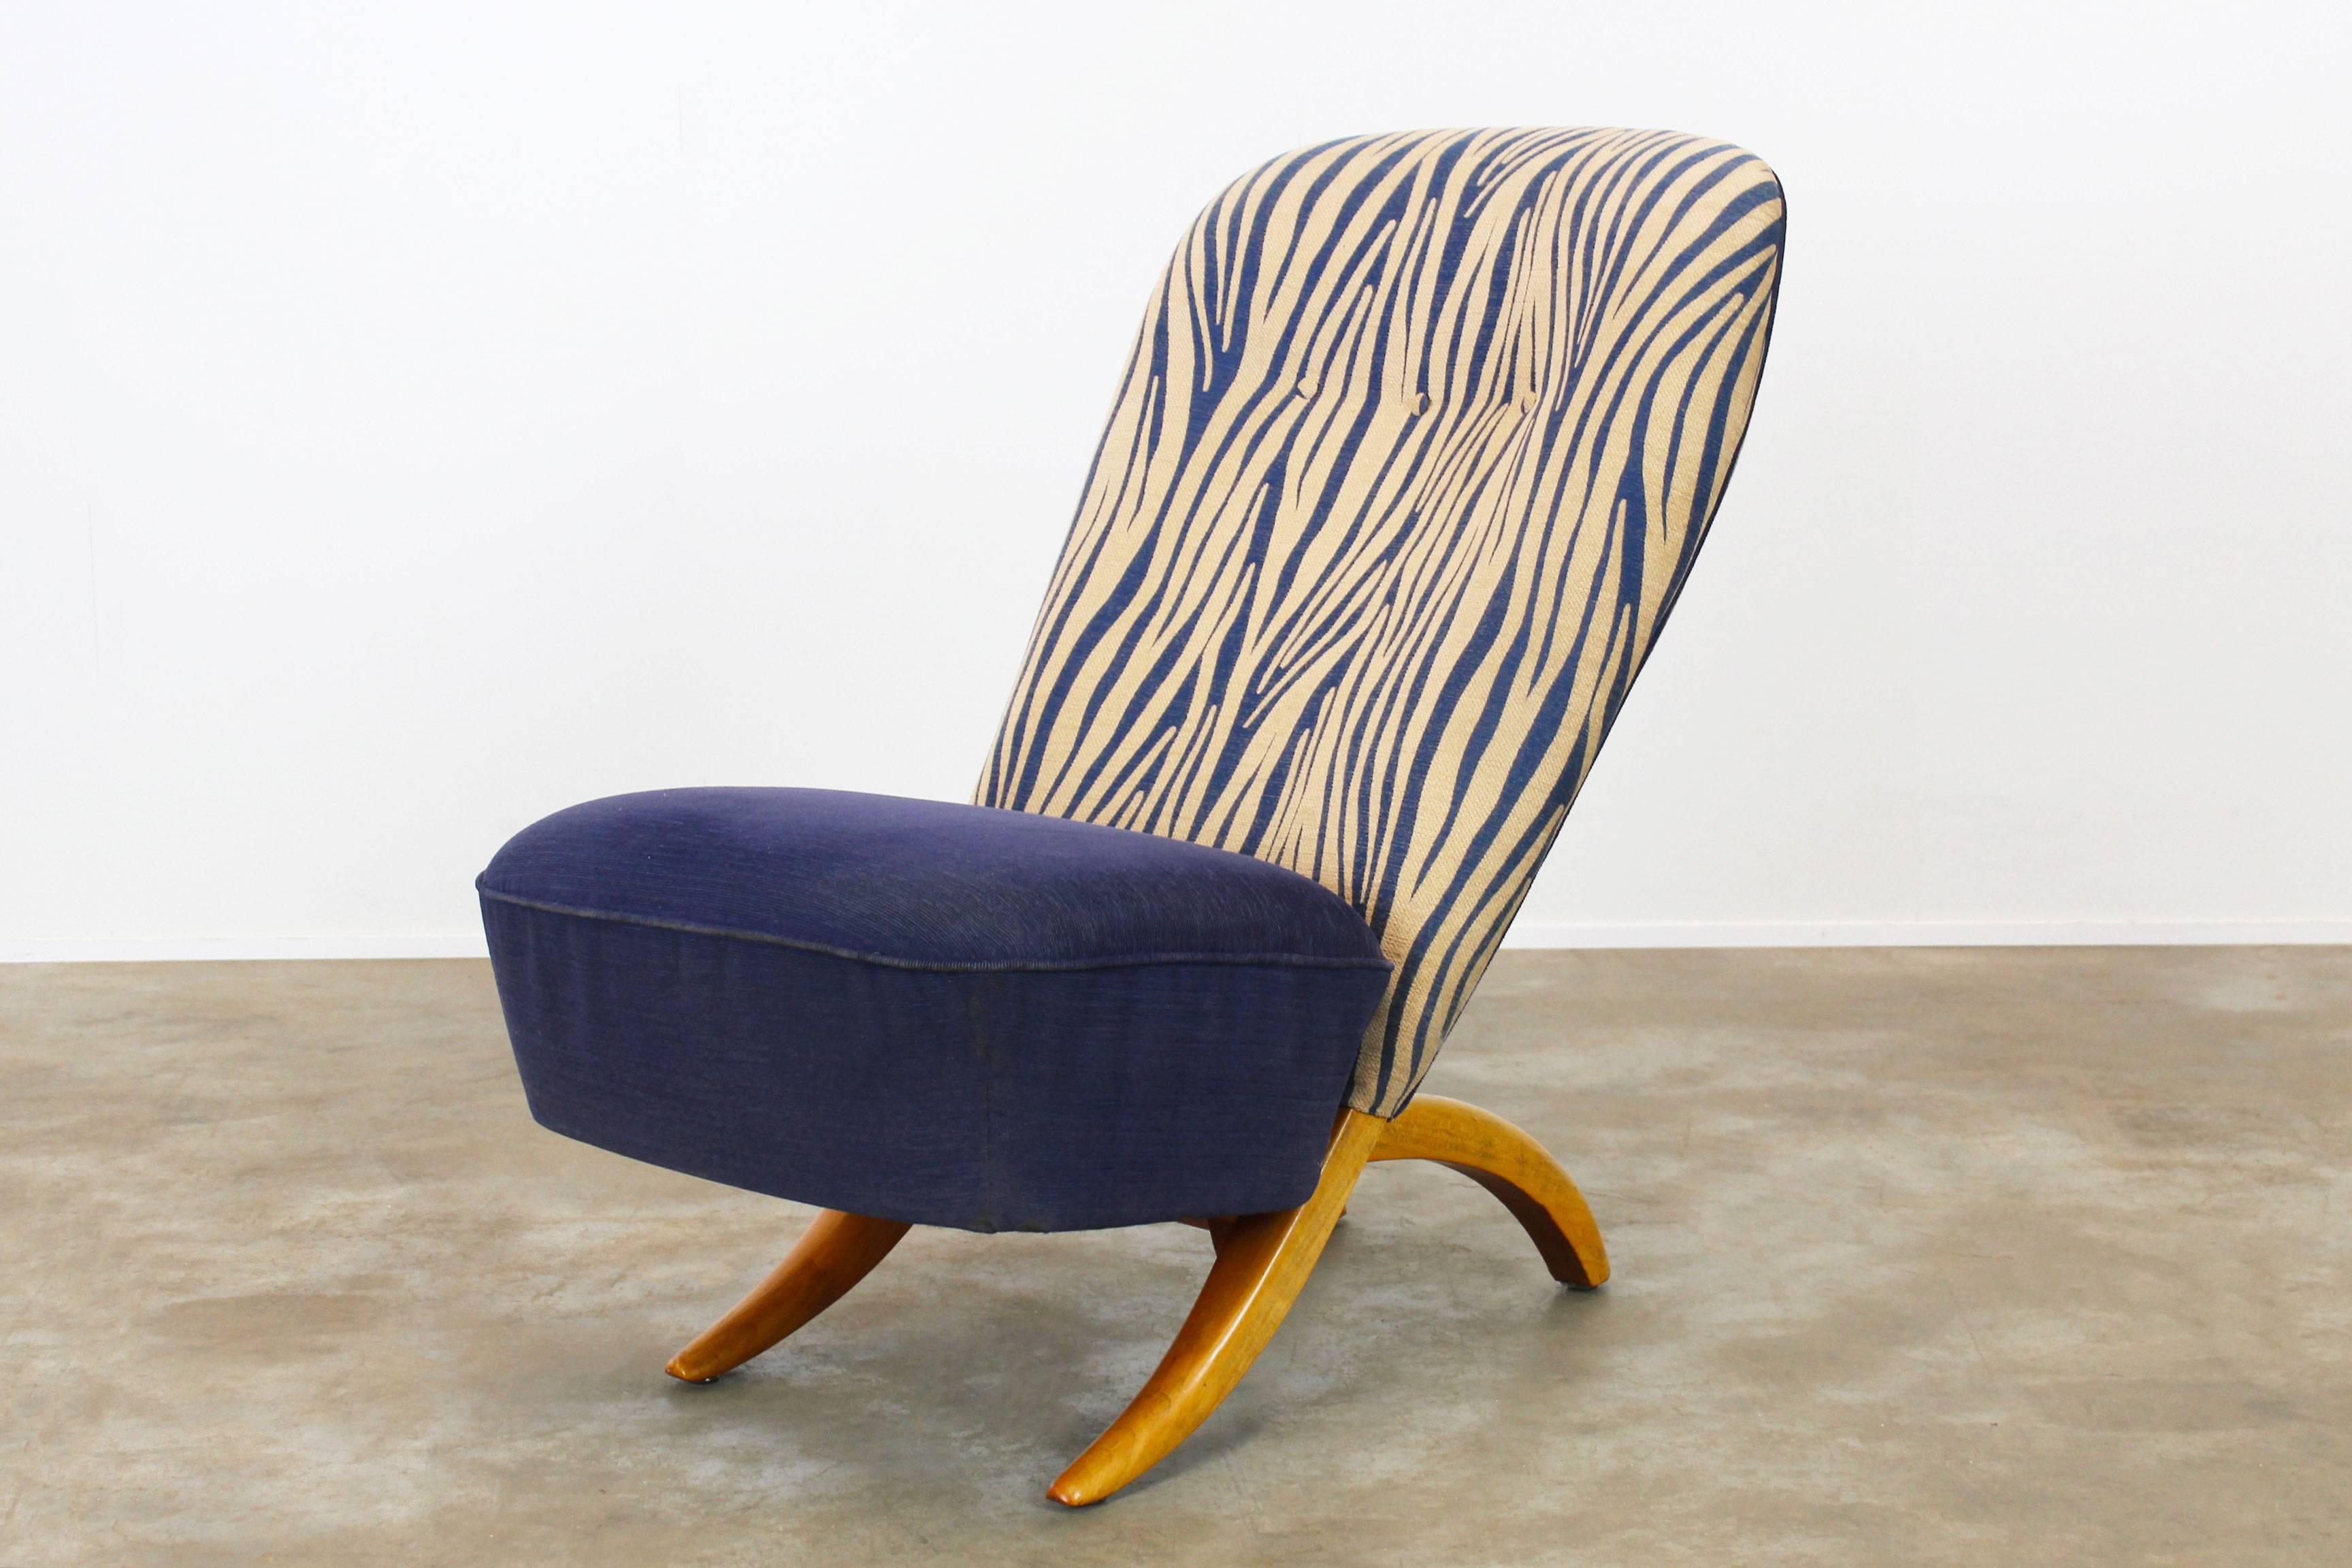 Magnificent original Artifort Congo chair designed by: Theo Ruth for Artifort in 1950. The chair is in great condition with its original Zebra pop art fabric. This chair will draw attention in any room. The Congo chair is made out of two pieces that